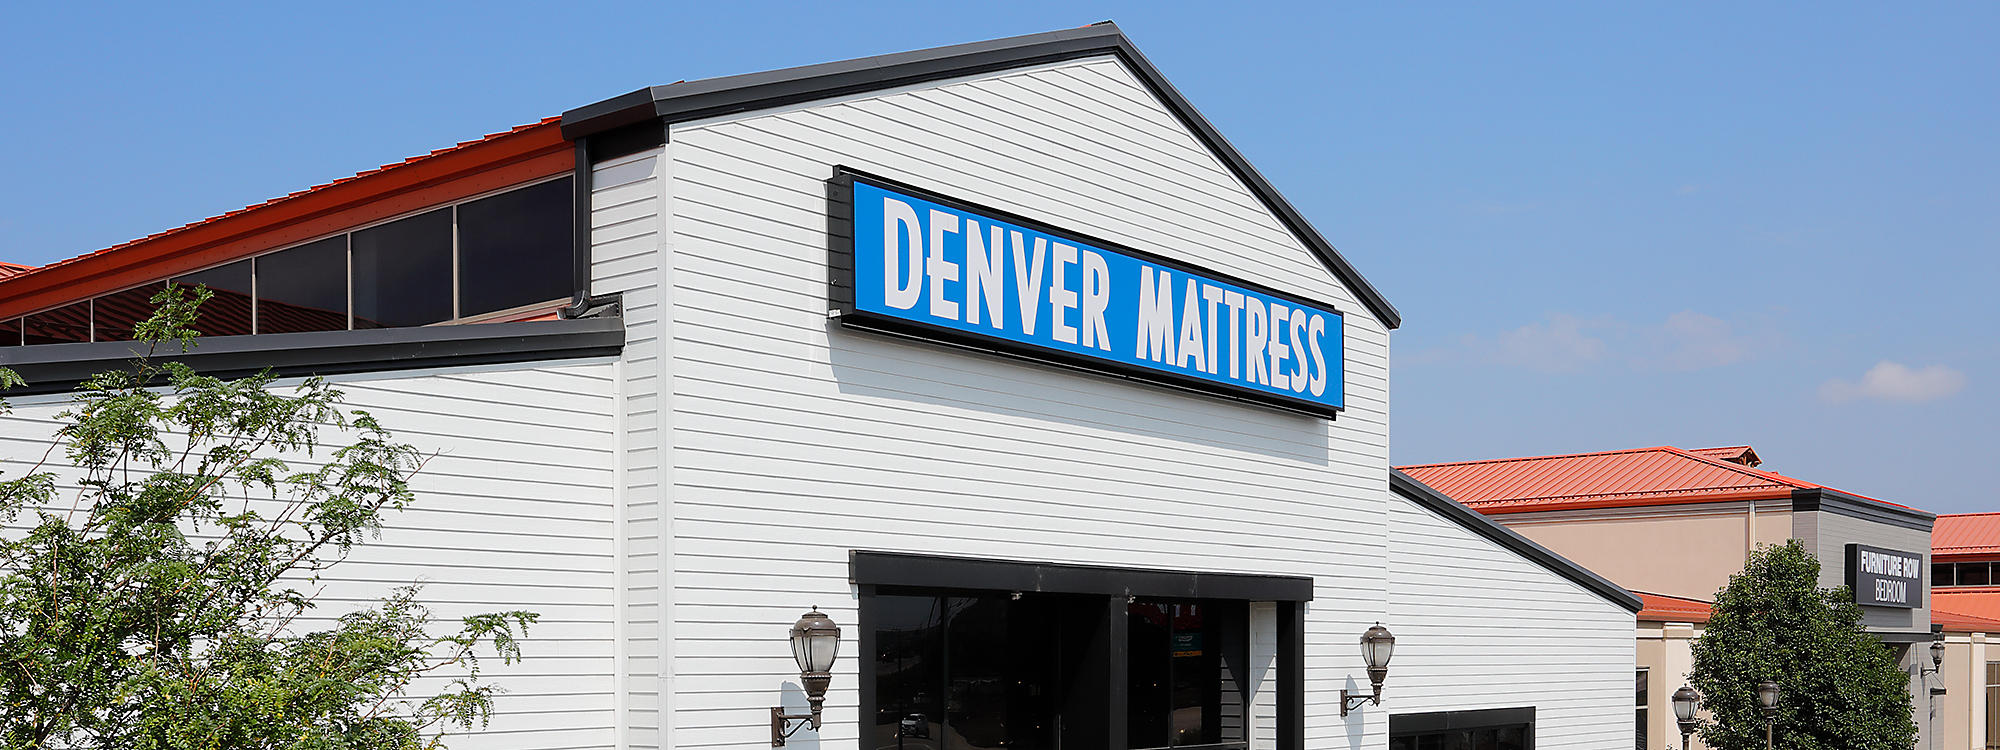 Denver Mattress The Easiest Way To Get The Right Mattress